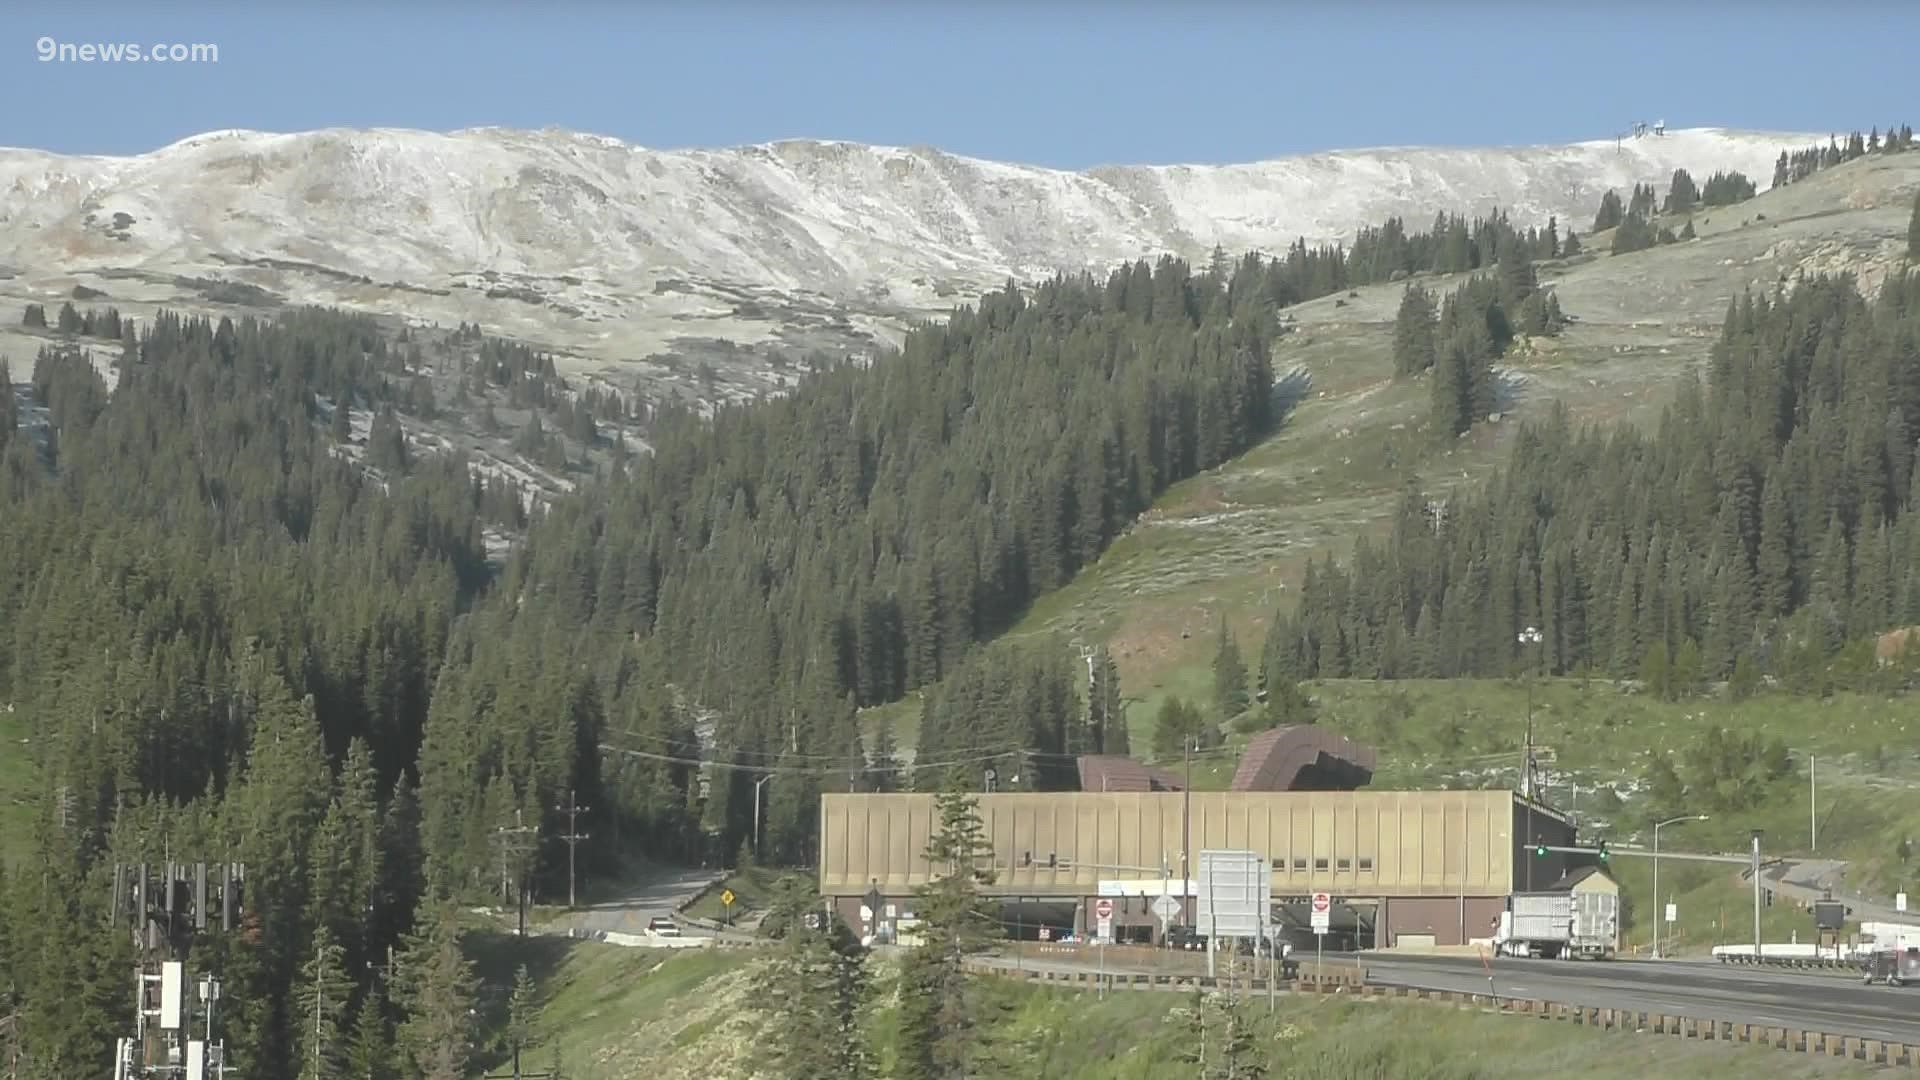 Colorado's mountain high country received its first snow of the 2021-22 season overnight on Friday, Aug. 20.